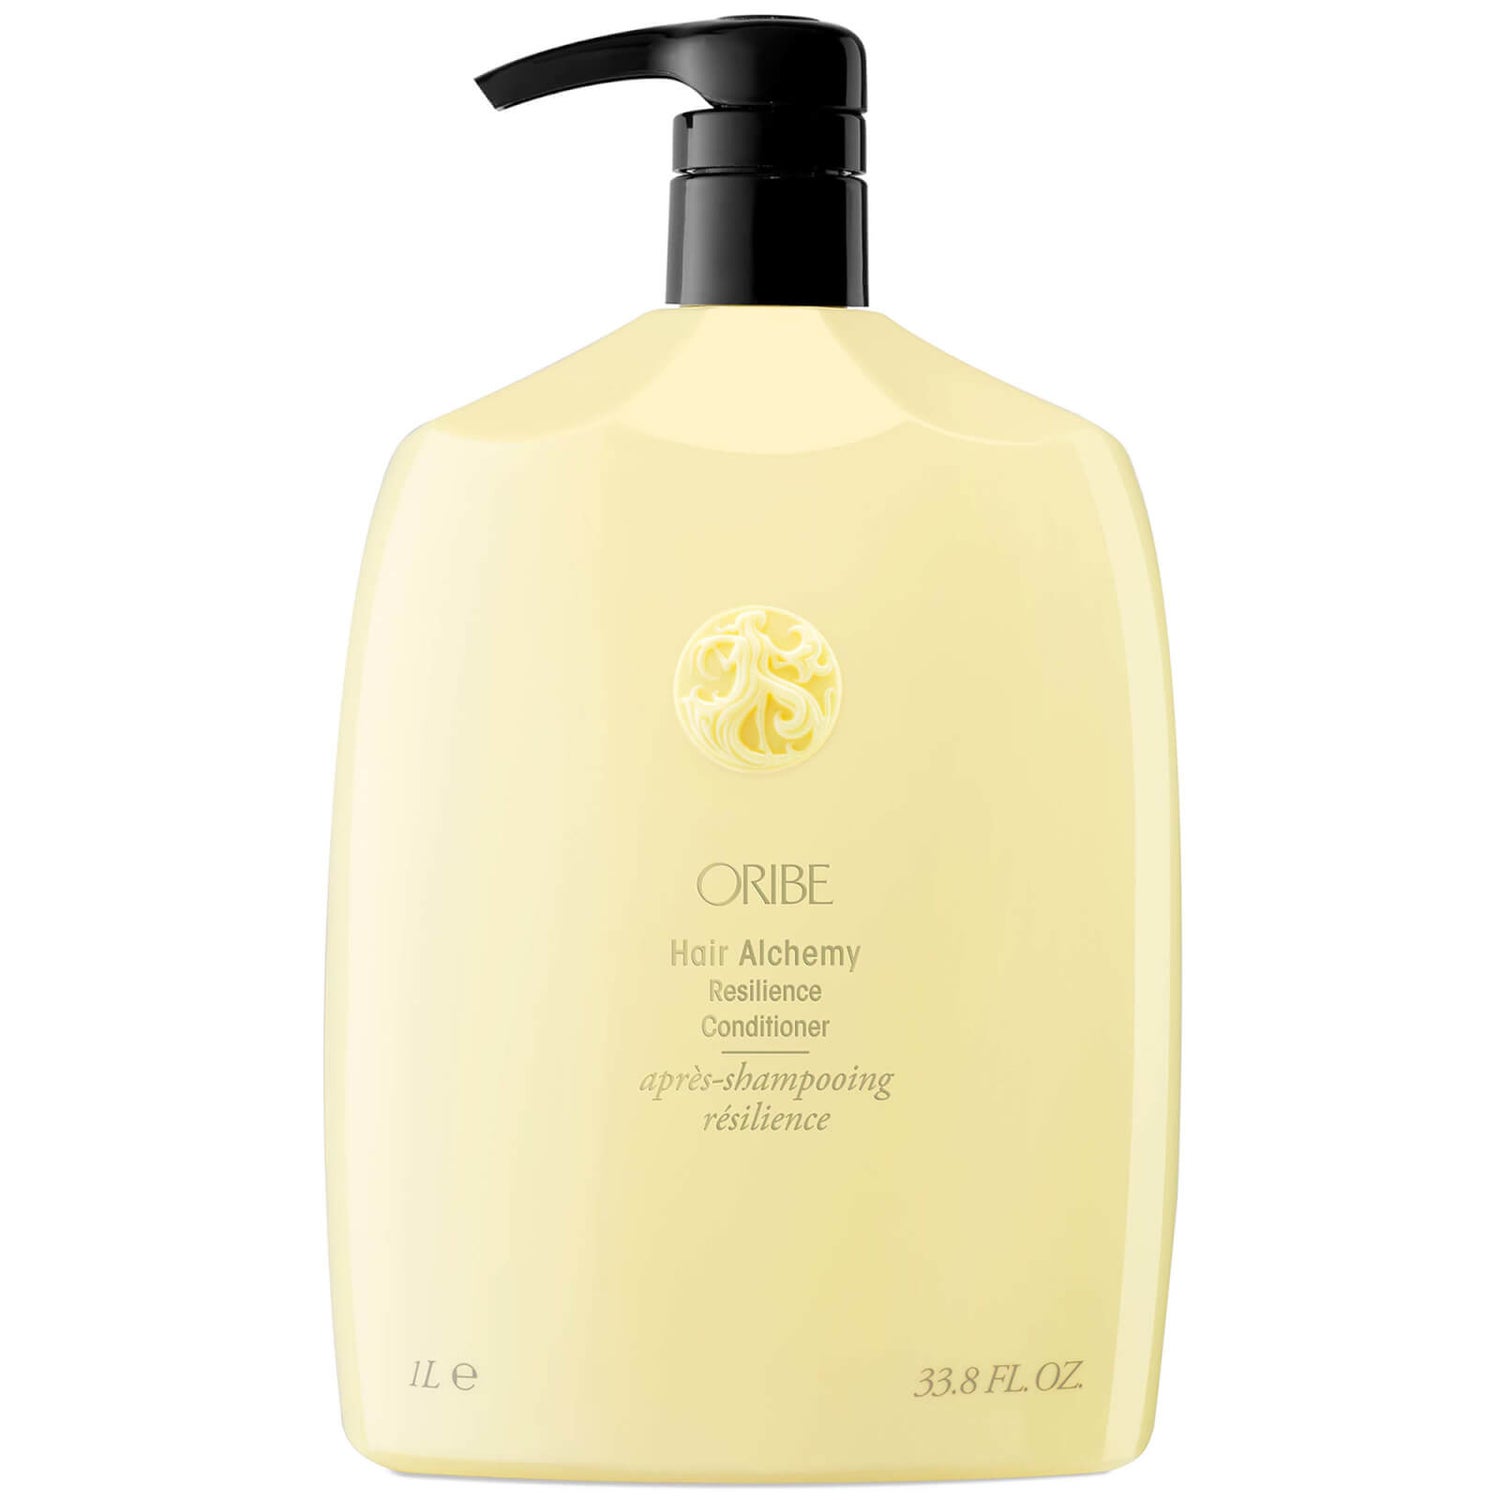 Oribe Hair Alchemy Resilience Conditioner 1L